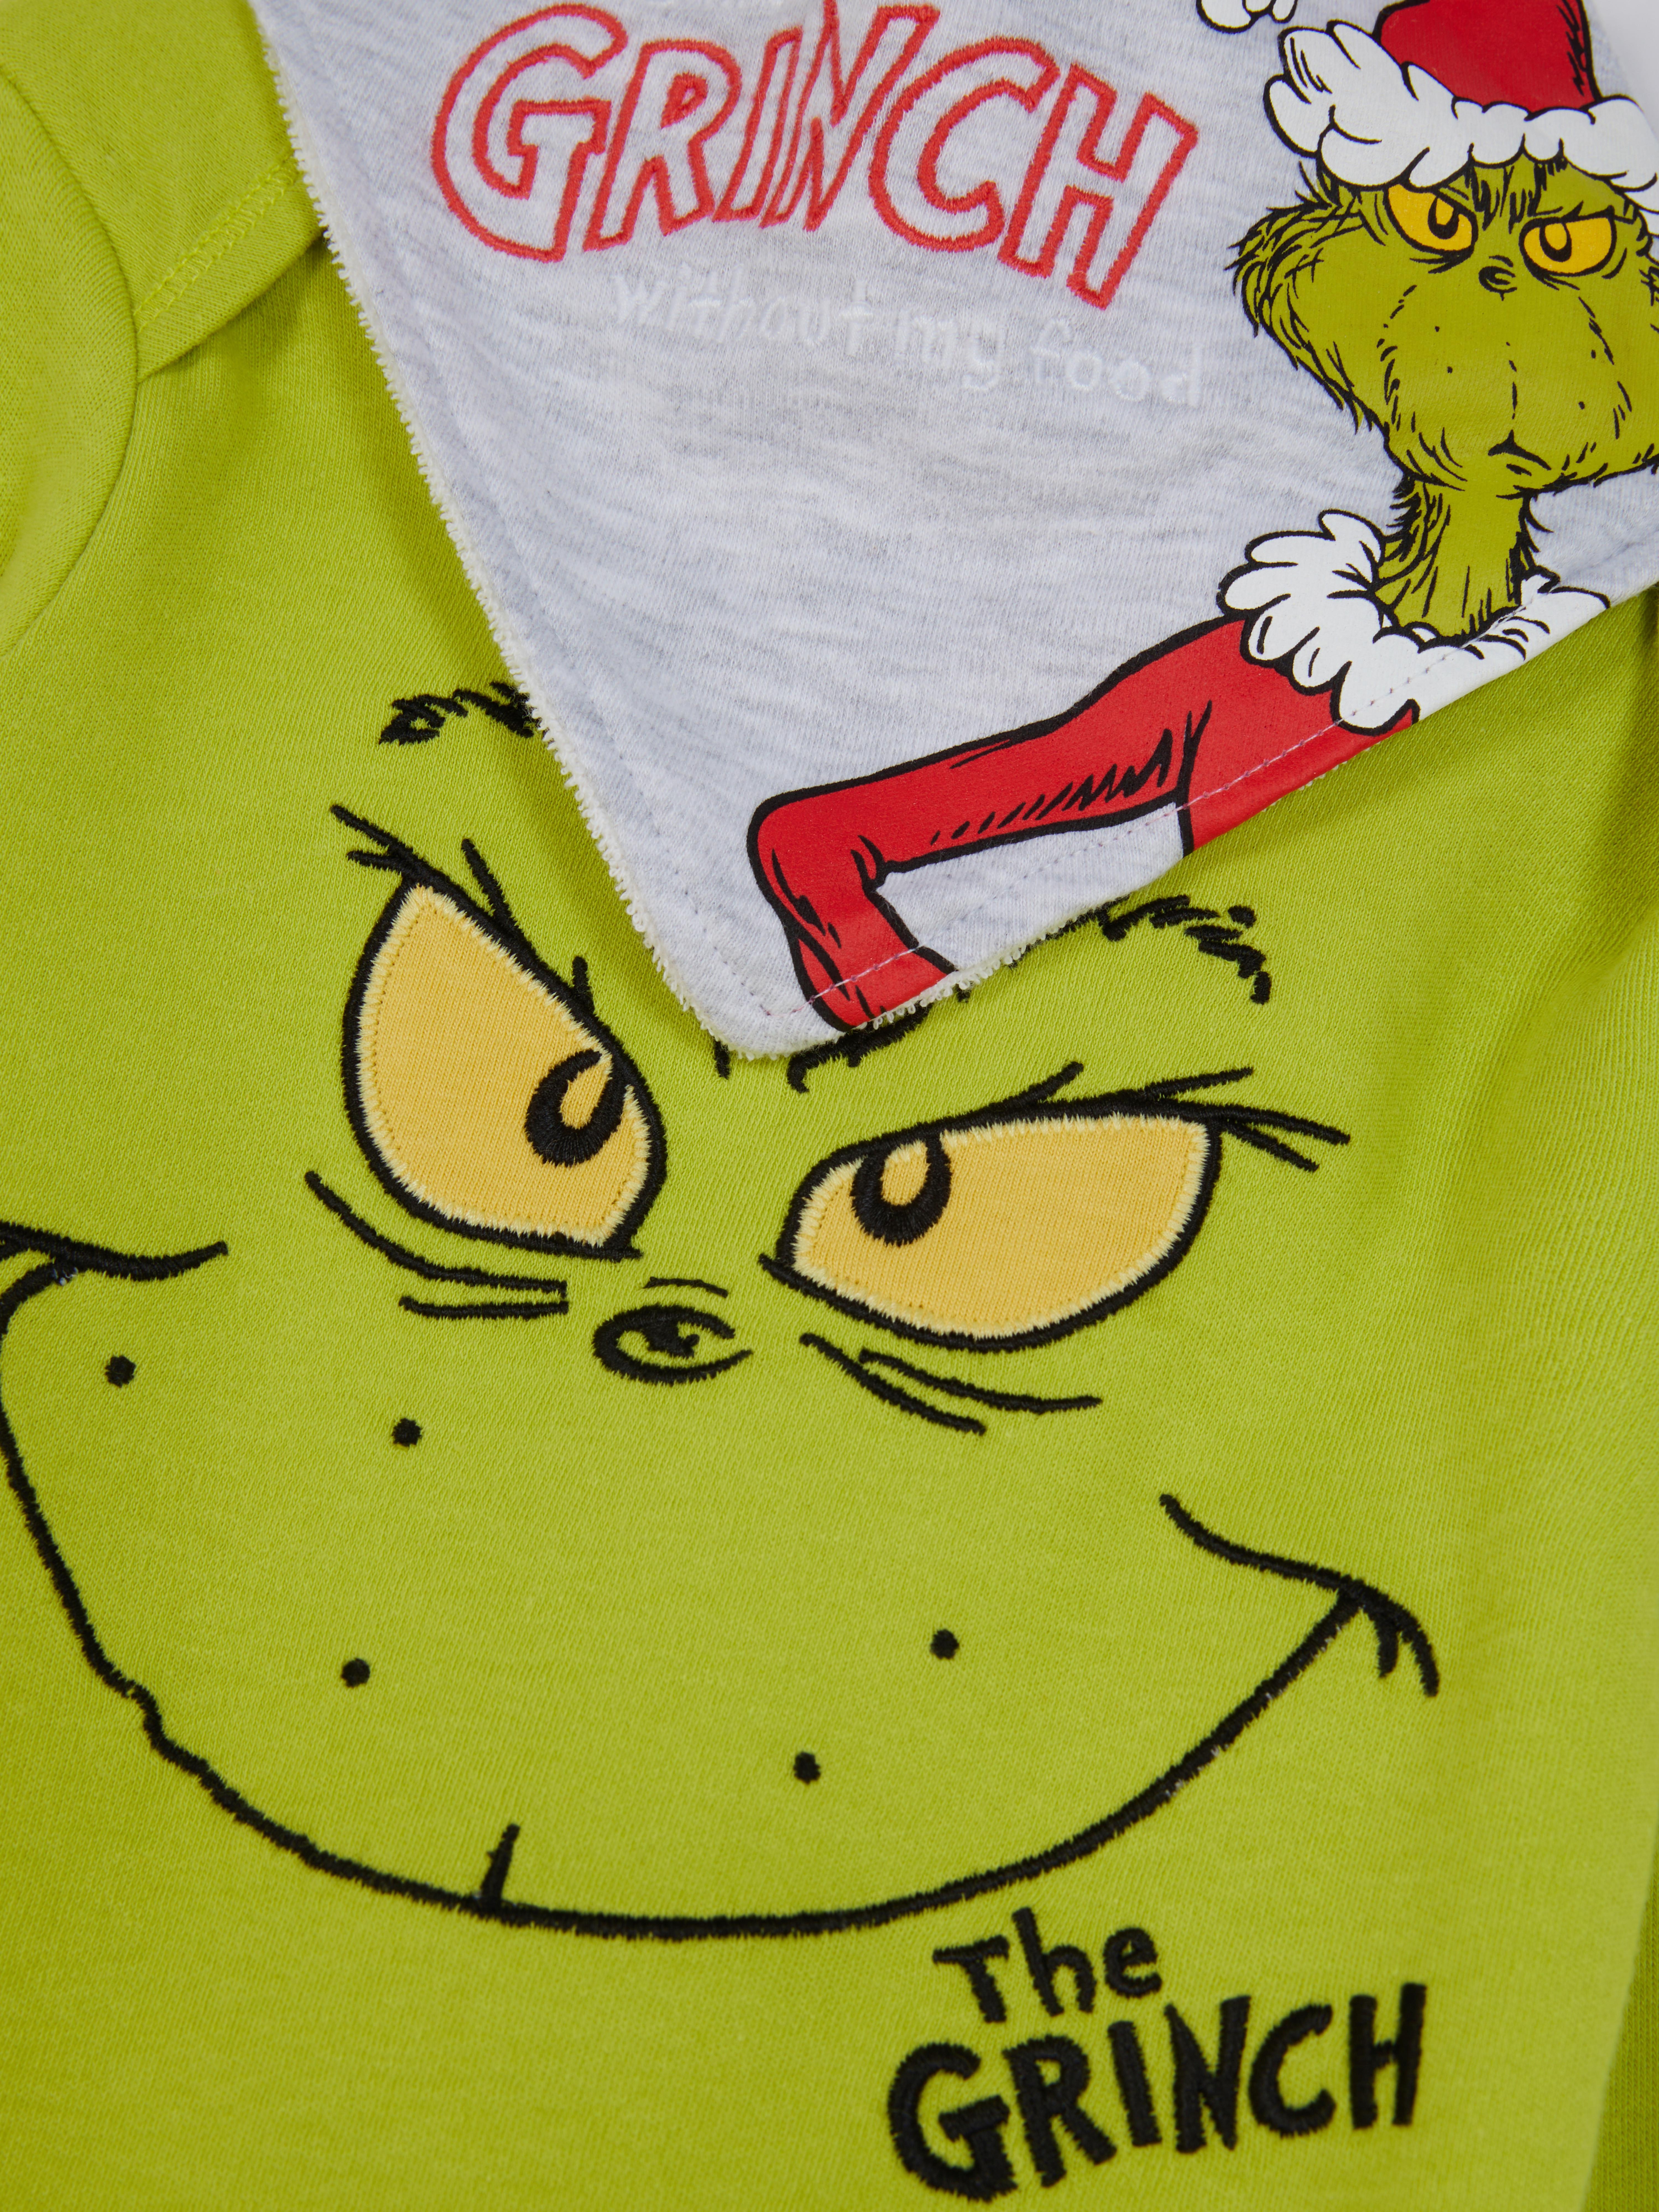 The Grinch Three-Piece Outfit